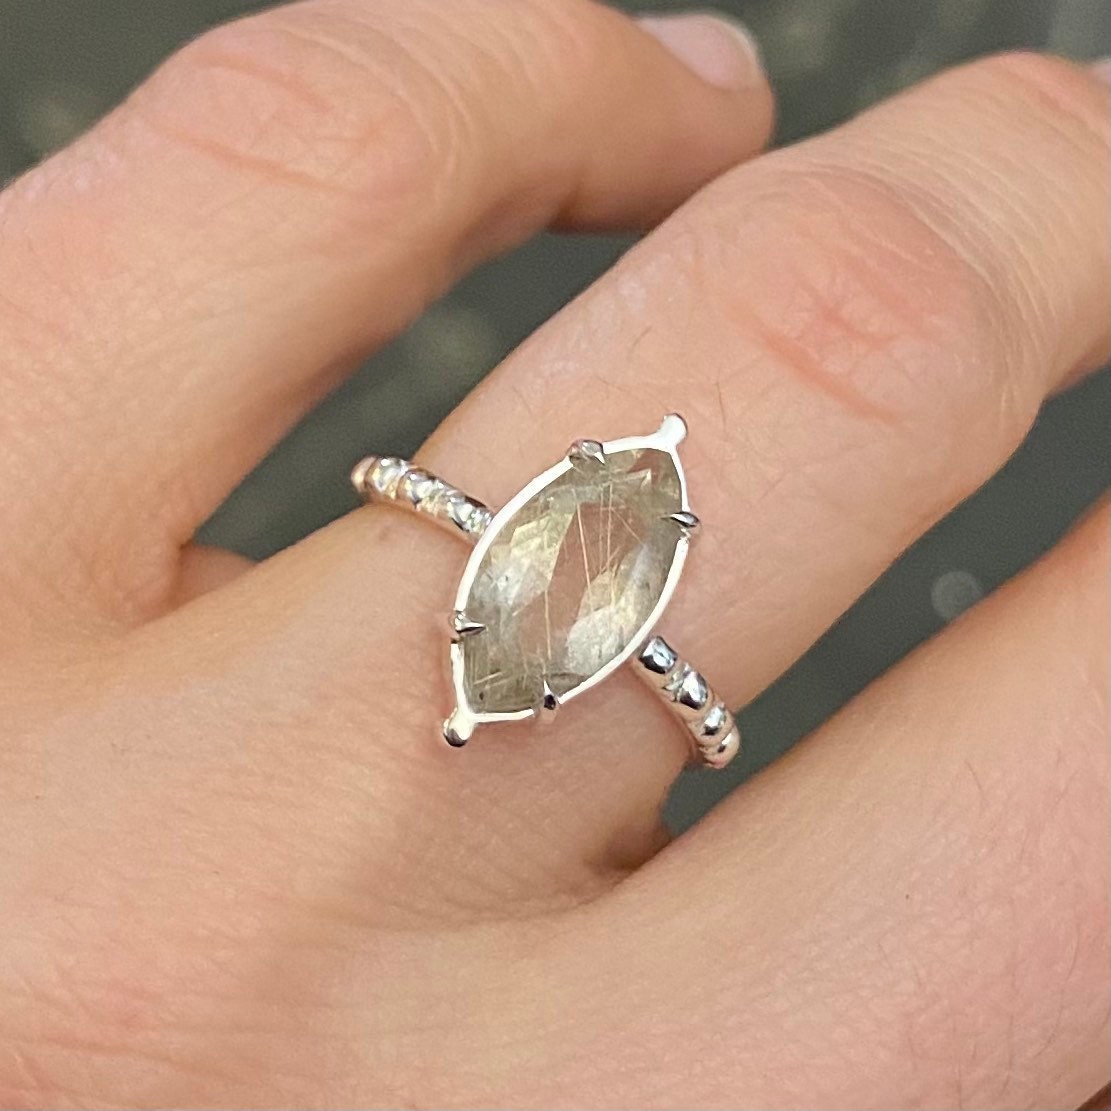 A woman wearing a handmade Rutile Quartz and Vintage Sterling Silver Milgrain Band Ring with a Diamond Shape Stone, crafted by Cassin Jewelry.